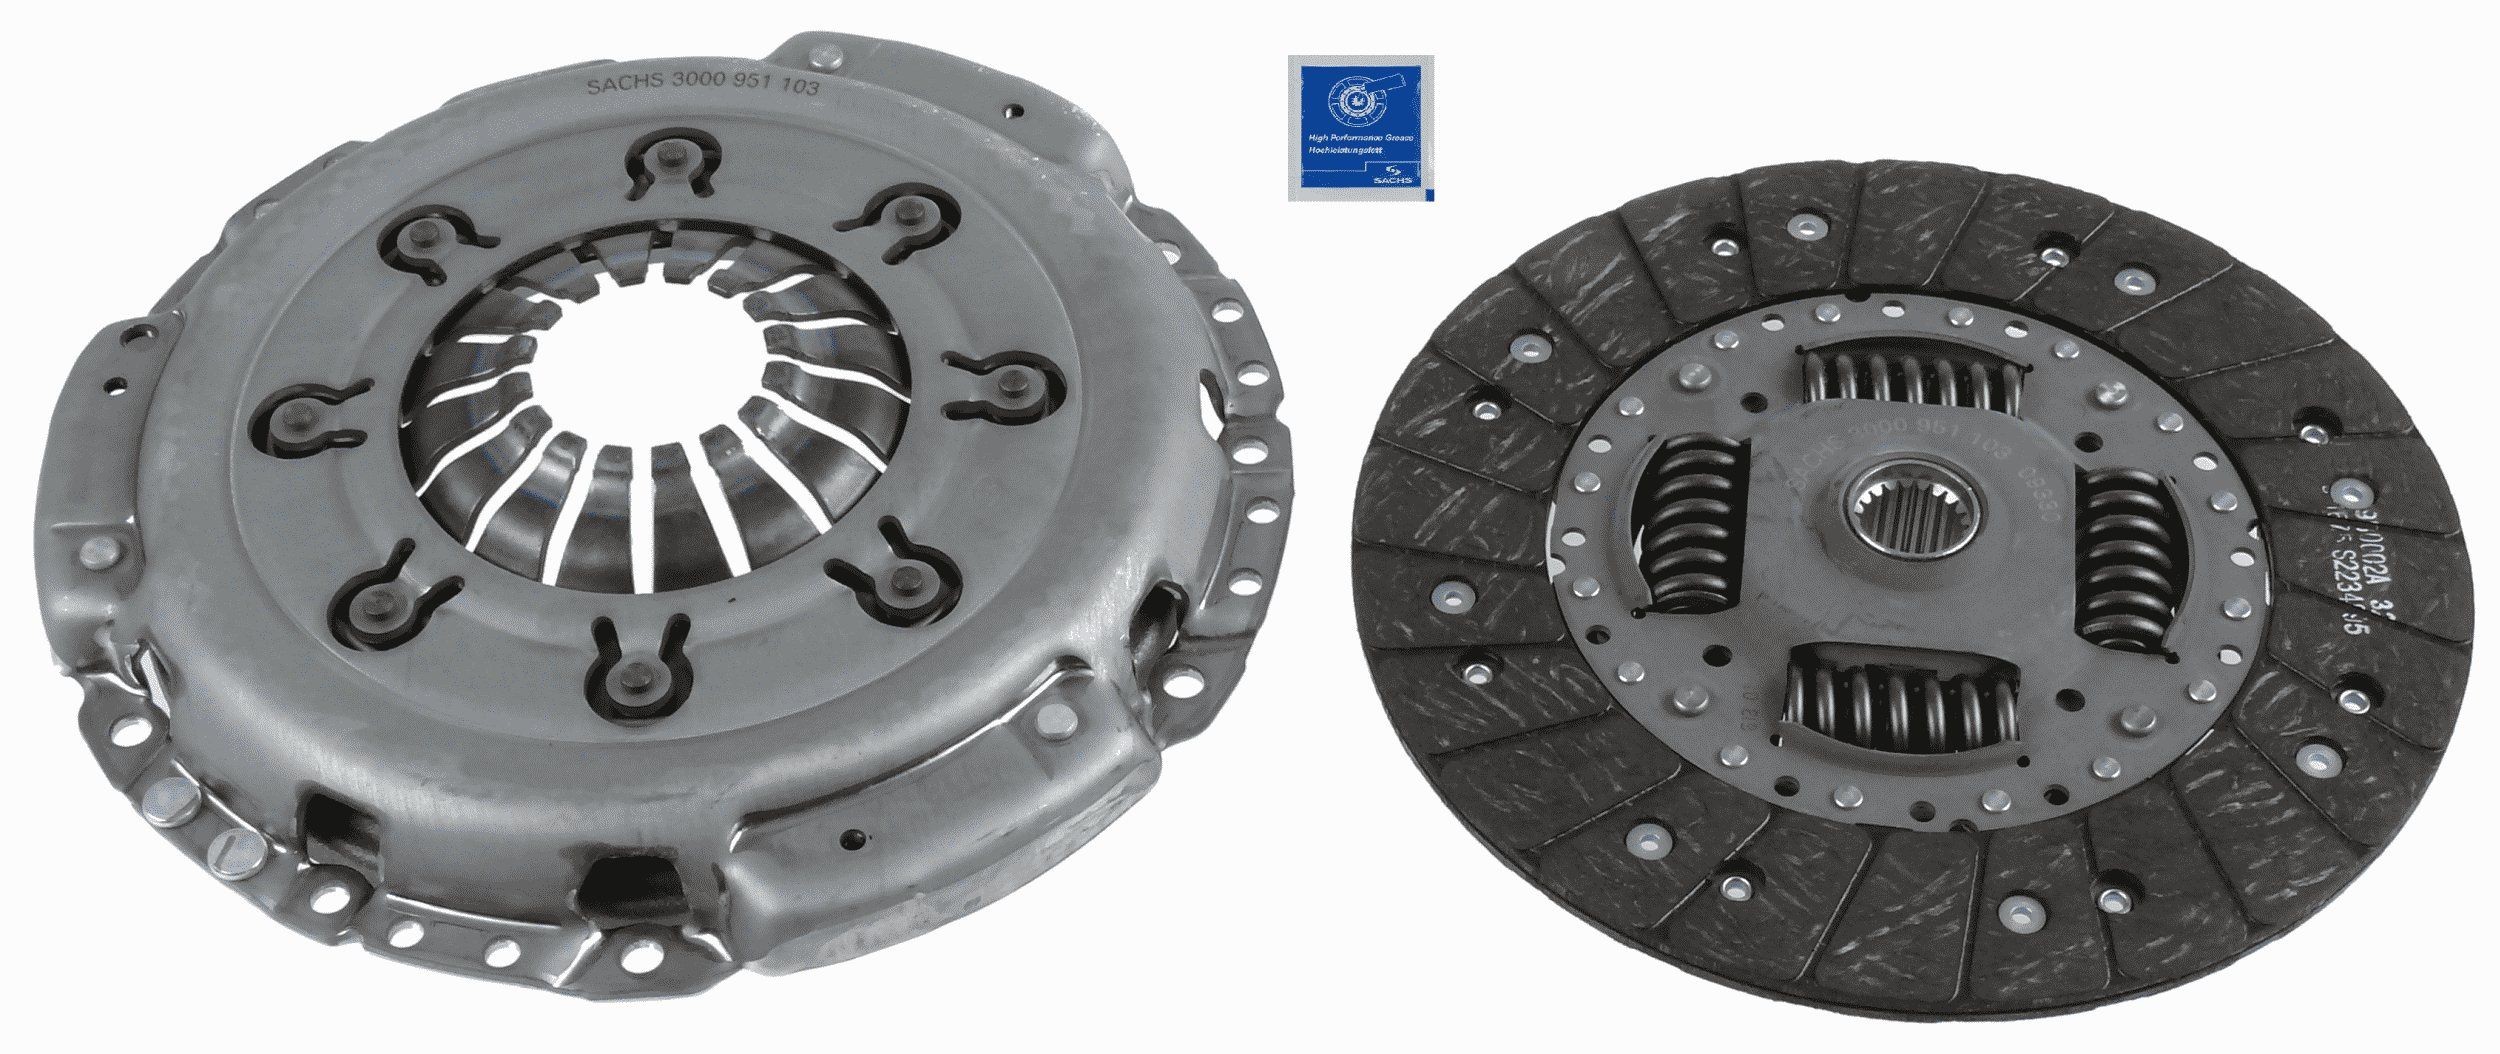 Opel MOVANO Complete clutch kit 1221546 SACHS 3000 951 103 online buy